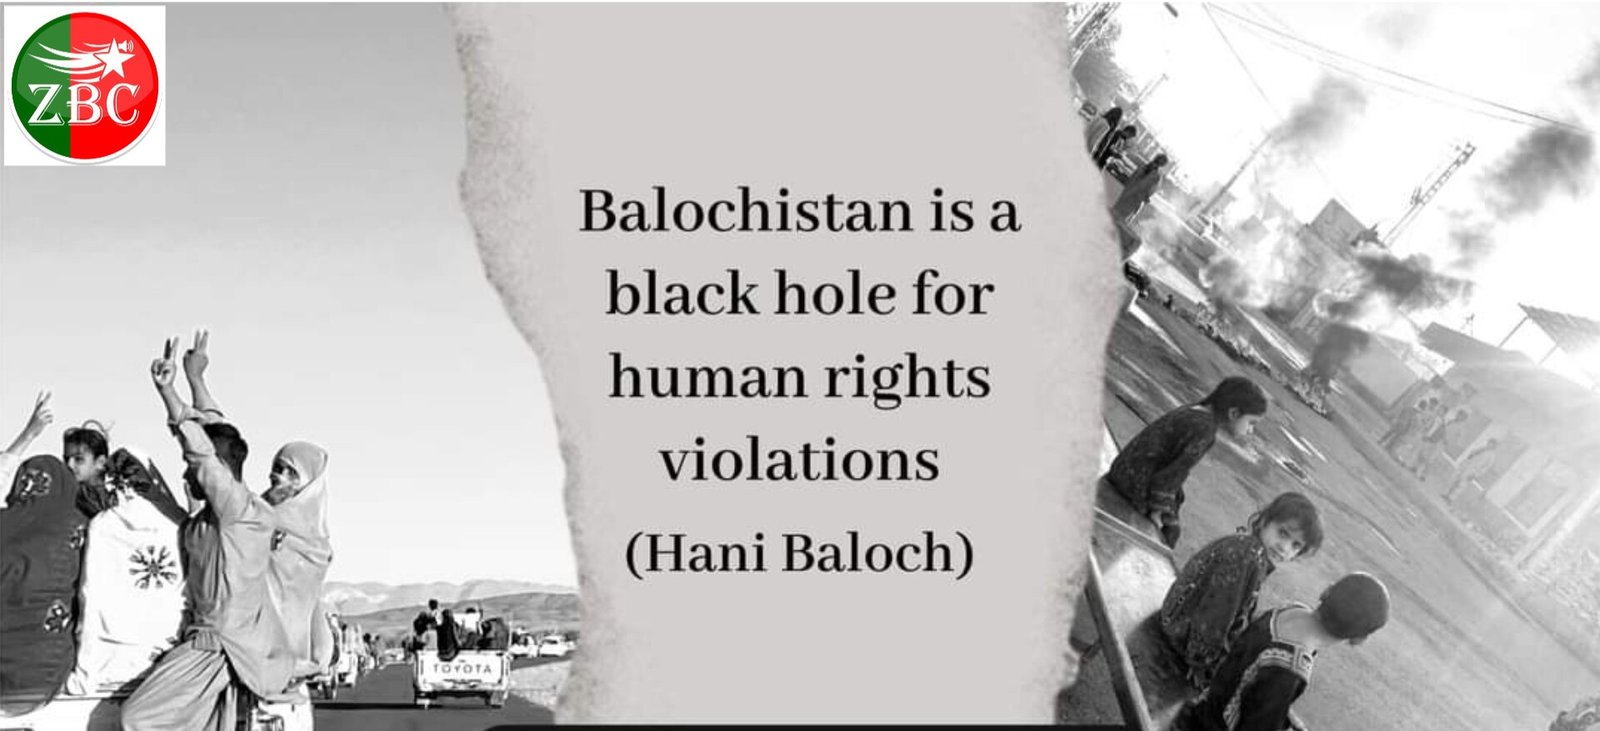 Balochistan is a black hole for human rights violations